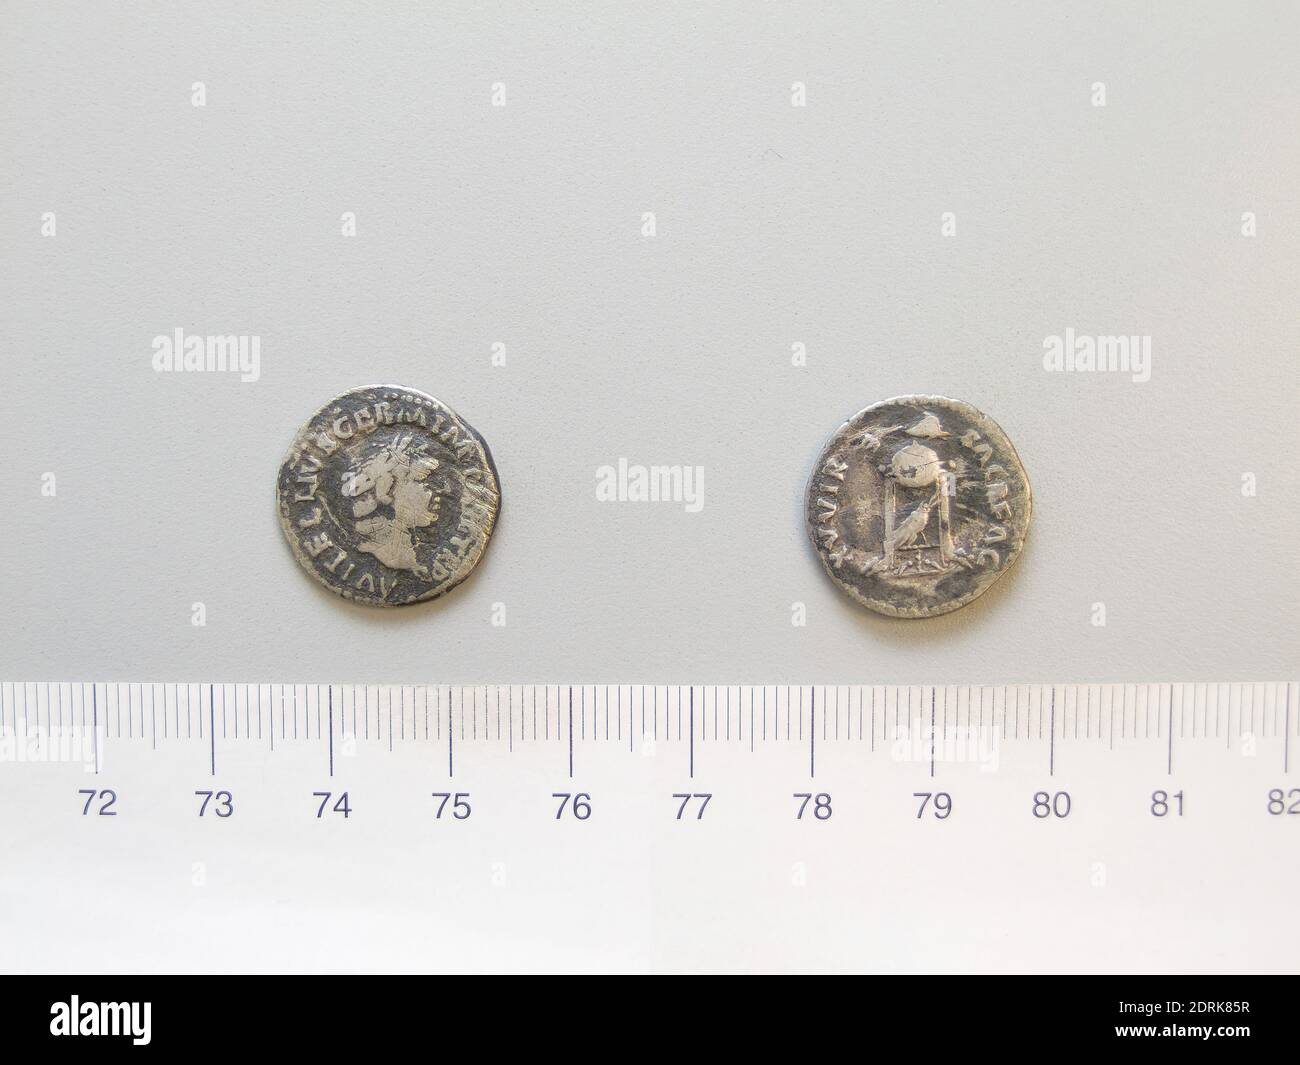 Ruler: Aulus Vitellius, Emperor of Rome, A.D. 15–69, ruled A.D. 68–69, Mint: Rome, Denarius of Aulus Vitellius, Emperor of Rome from Rome, 69, Silver, 3.23 g, 7:00, 18.9 mm, Made in Rome, Italy, Roman, 1st century A.D., Numismatics Stock Photo